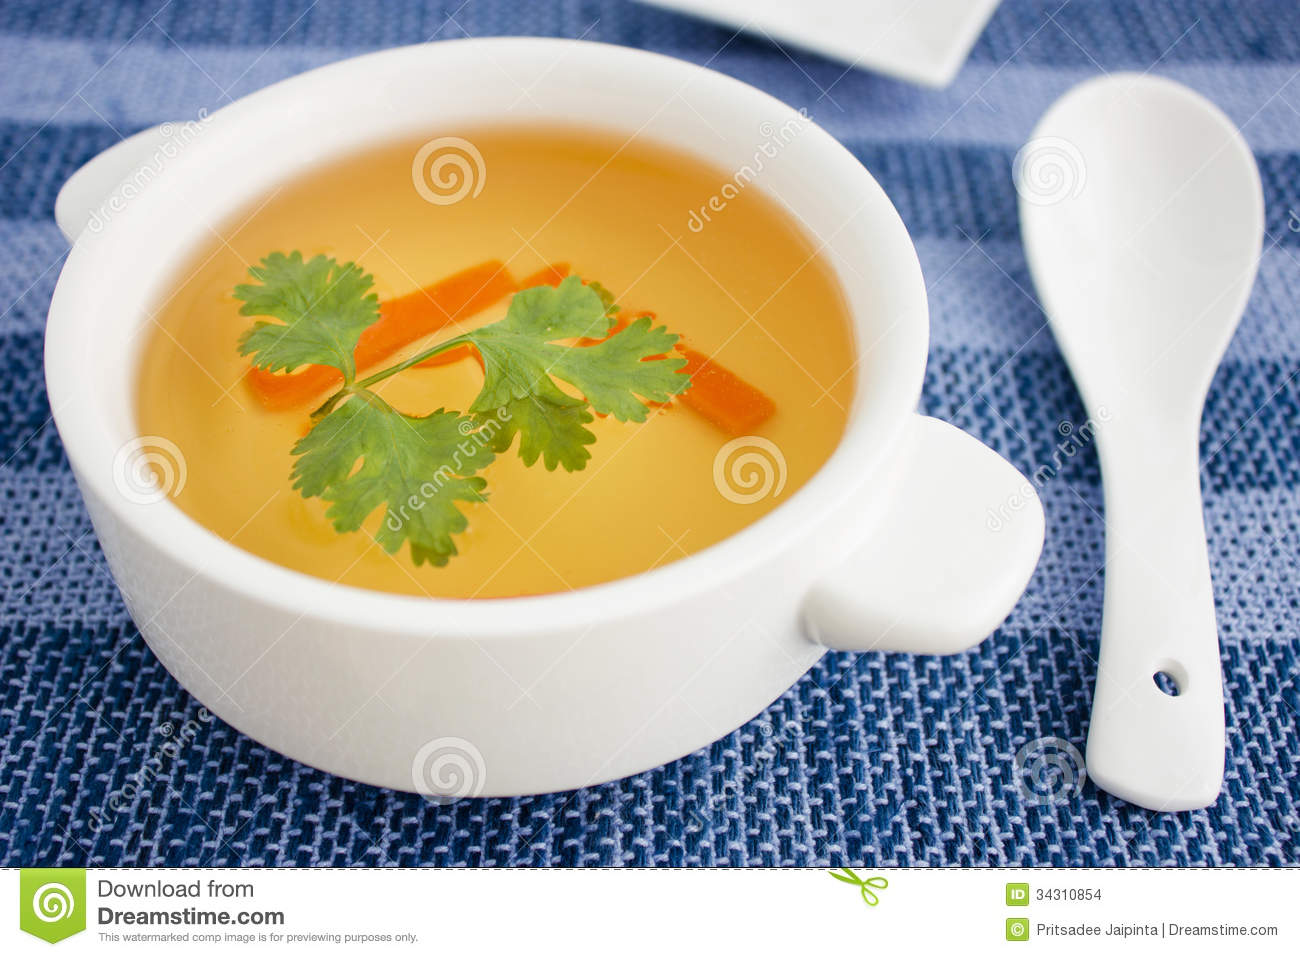 Hot Dish Of Chicken Broth Stock Images   Image  34310854